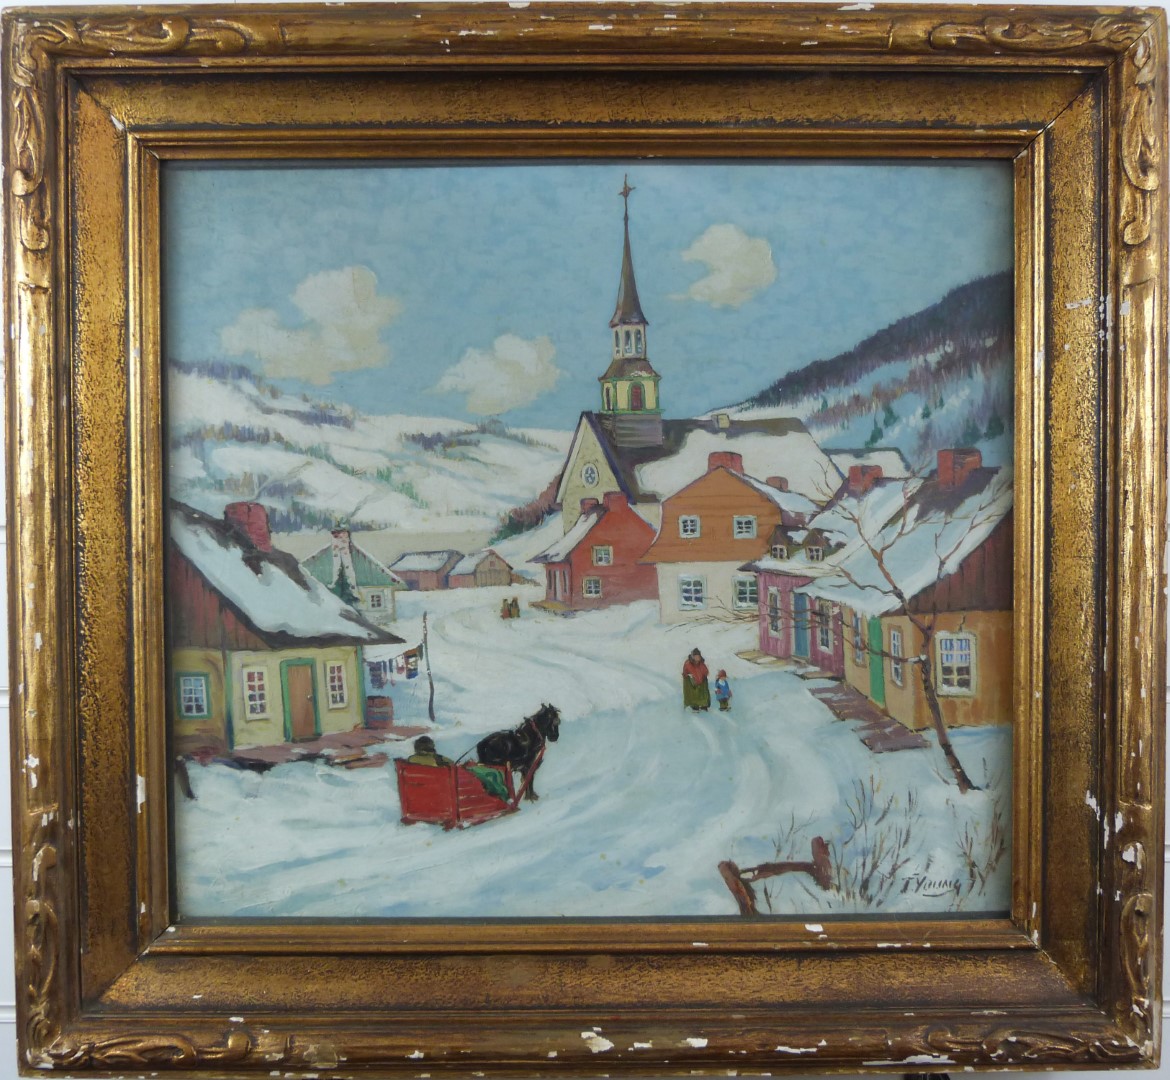 T Young oil on canvas of a Continental snowy village, signed lower right, 45 x 50cm, in gilt frame - Image 2 of 4